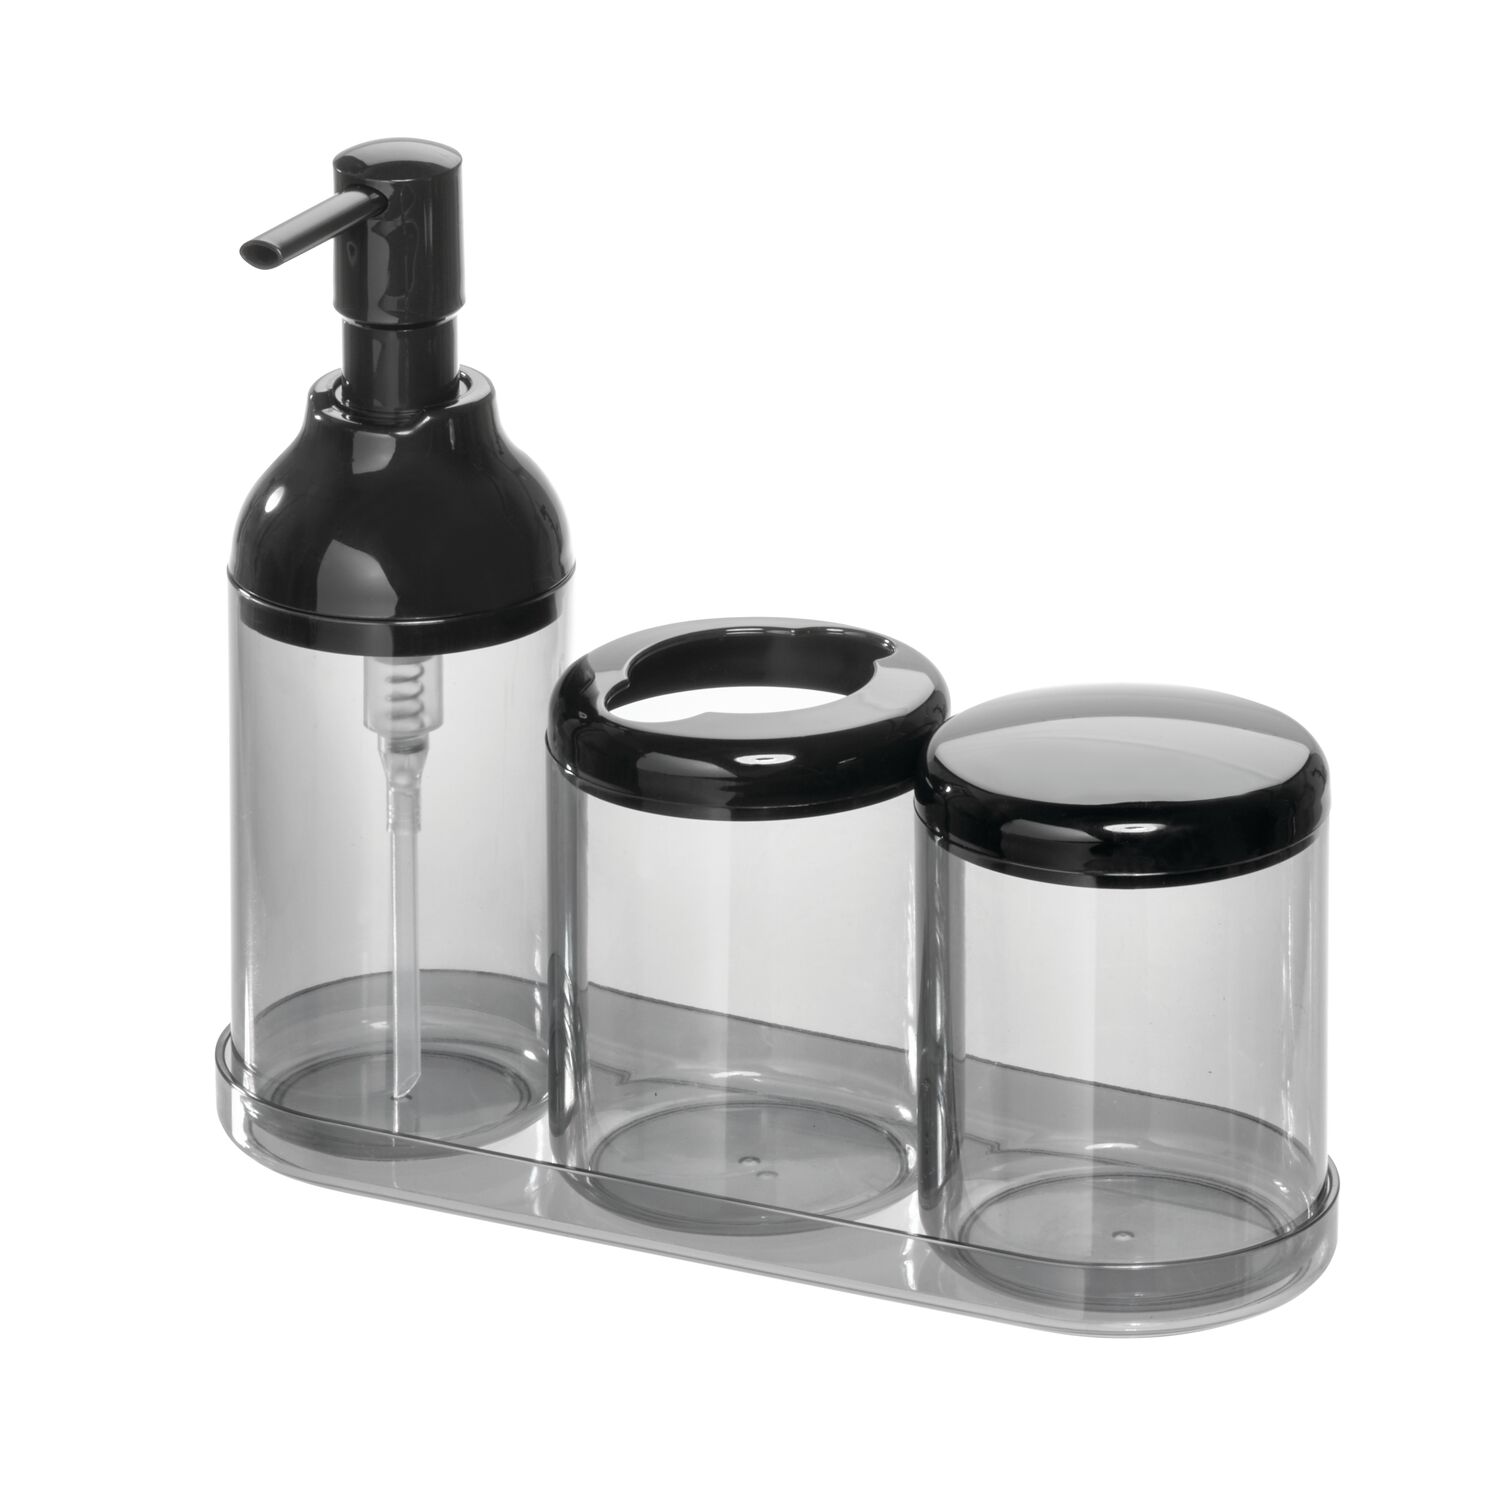 iDesign 4 Piece Clear Bath Accessories Sets, Black - image 4 of 6